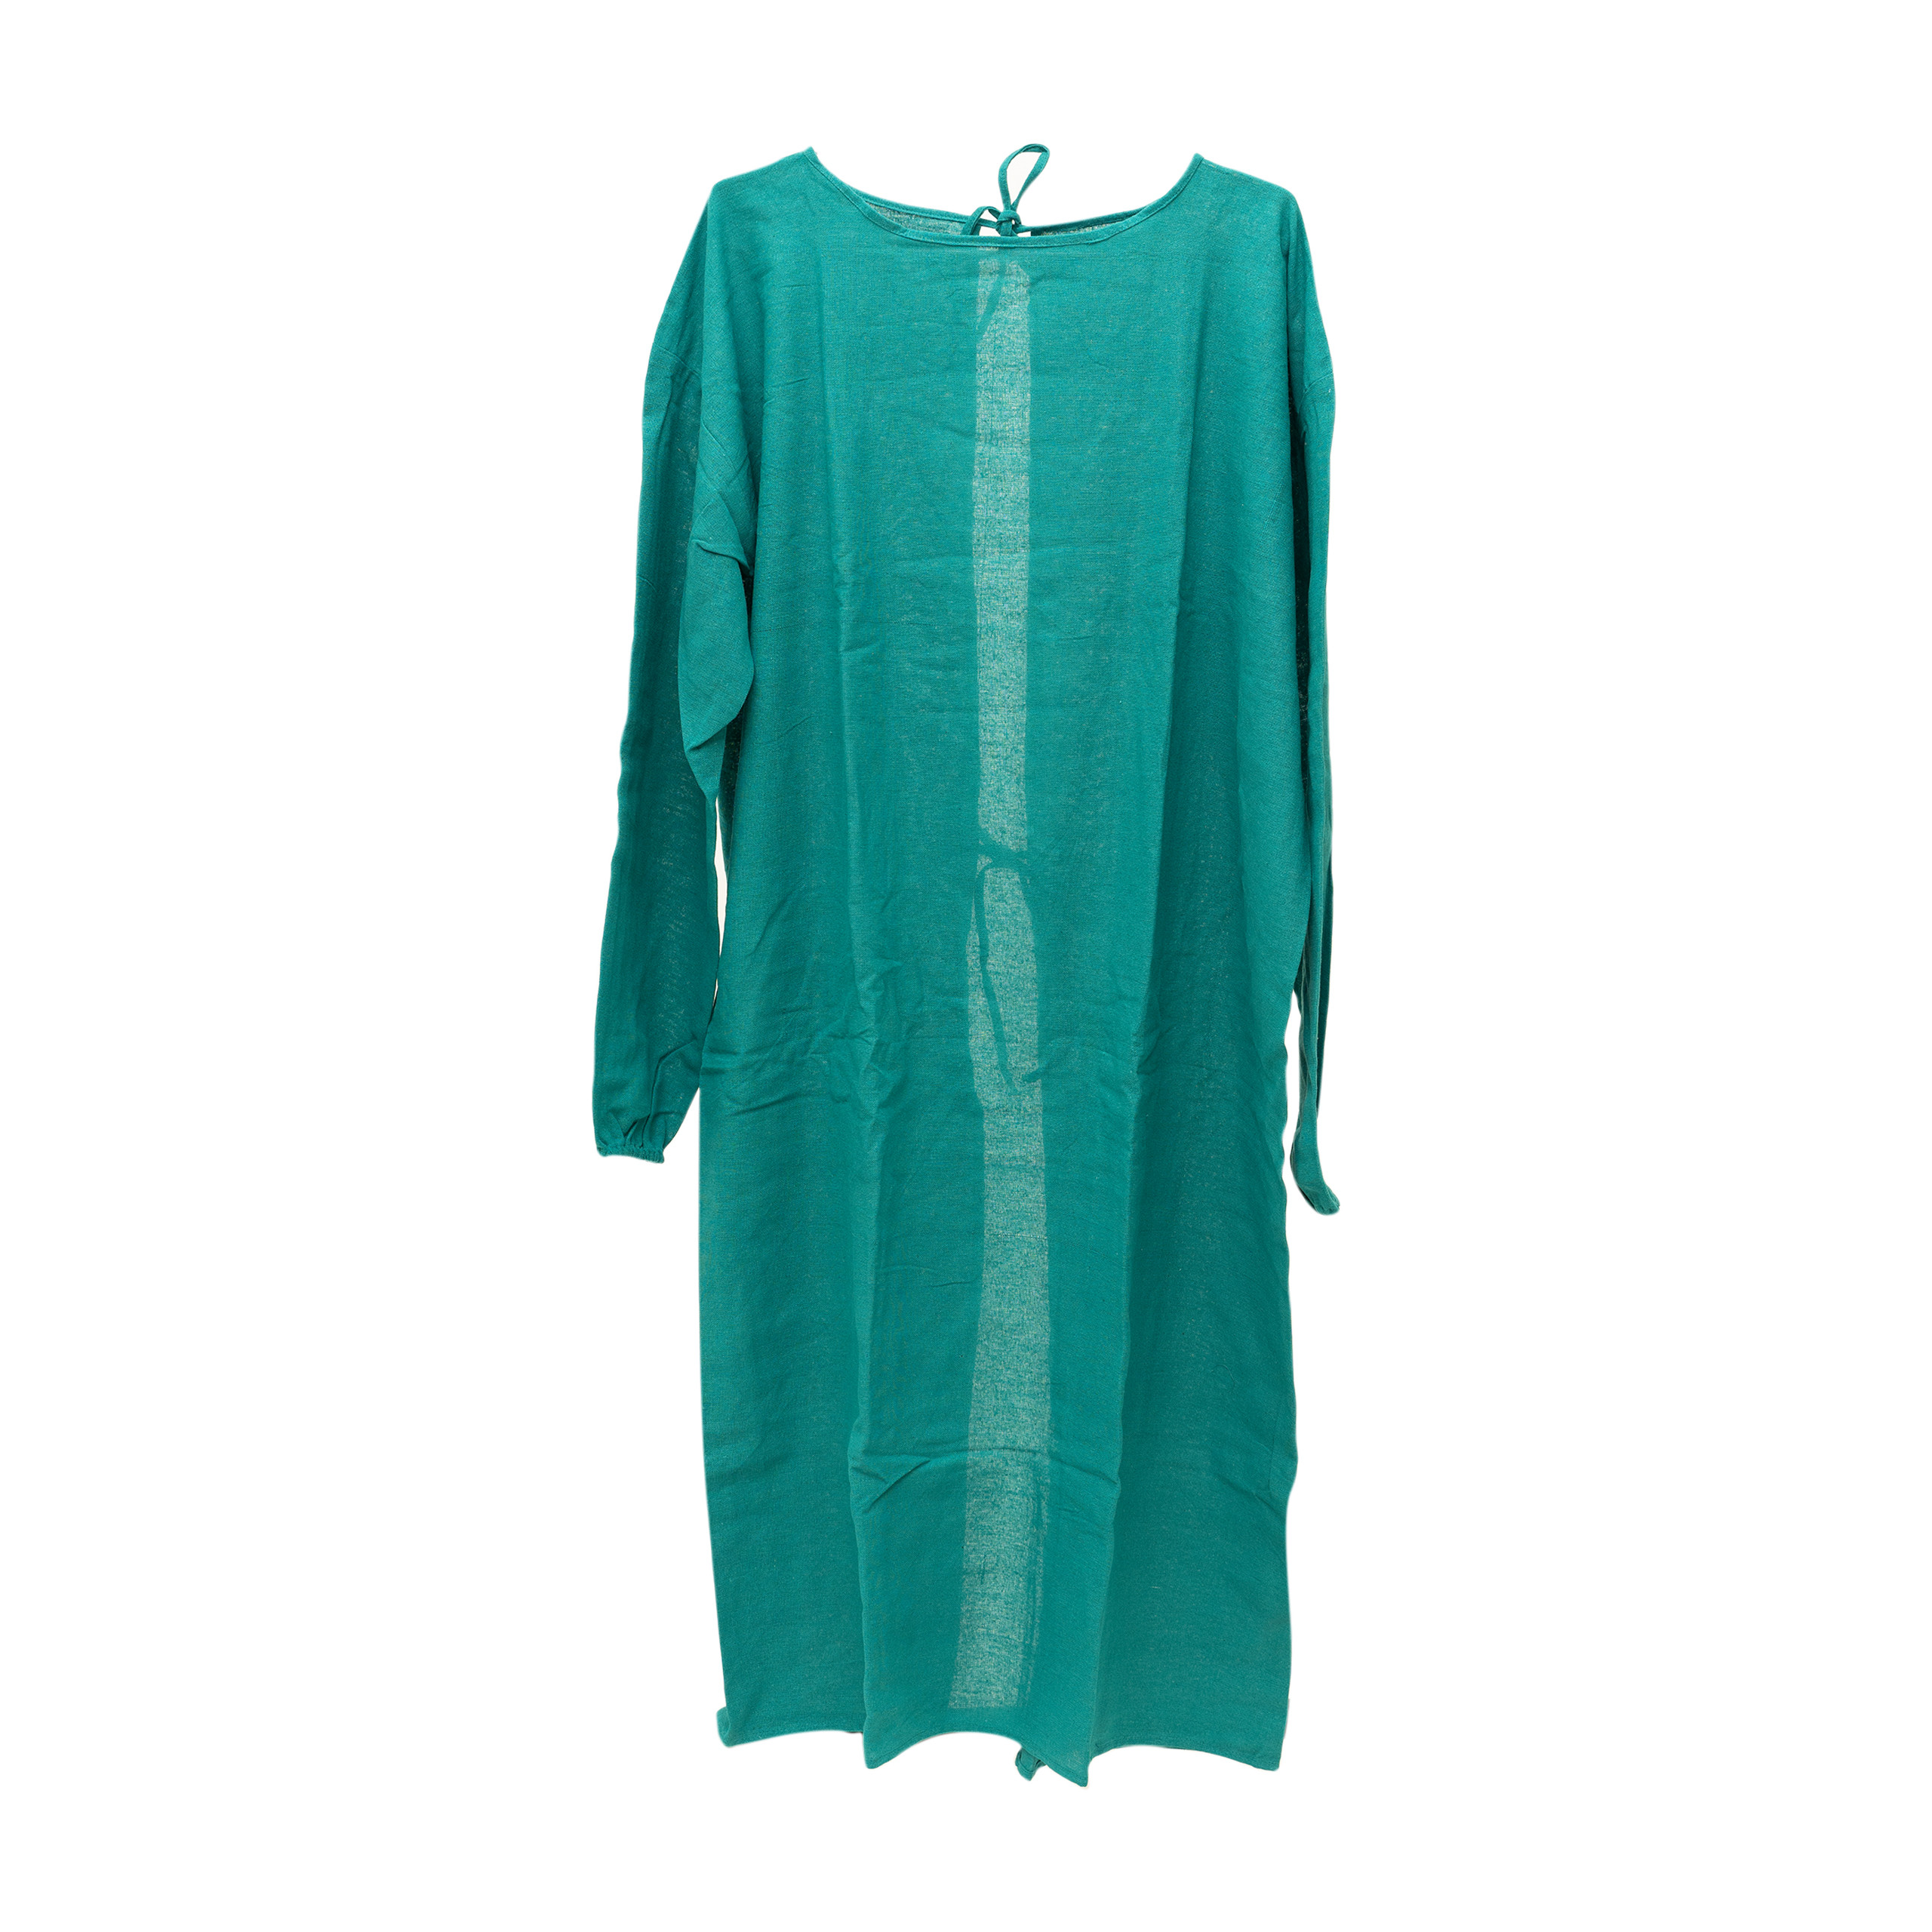 Surgical Gown Green Cloth